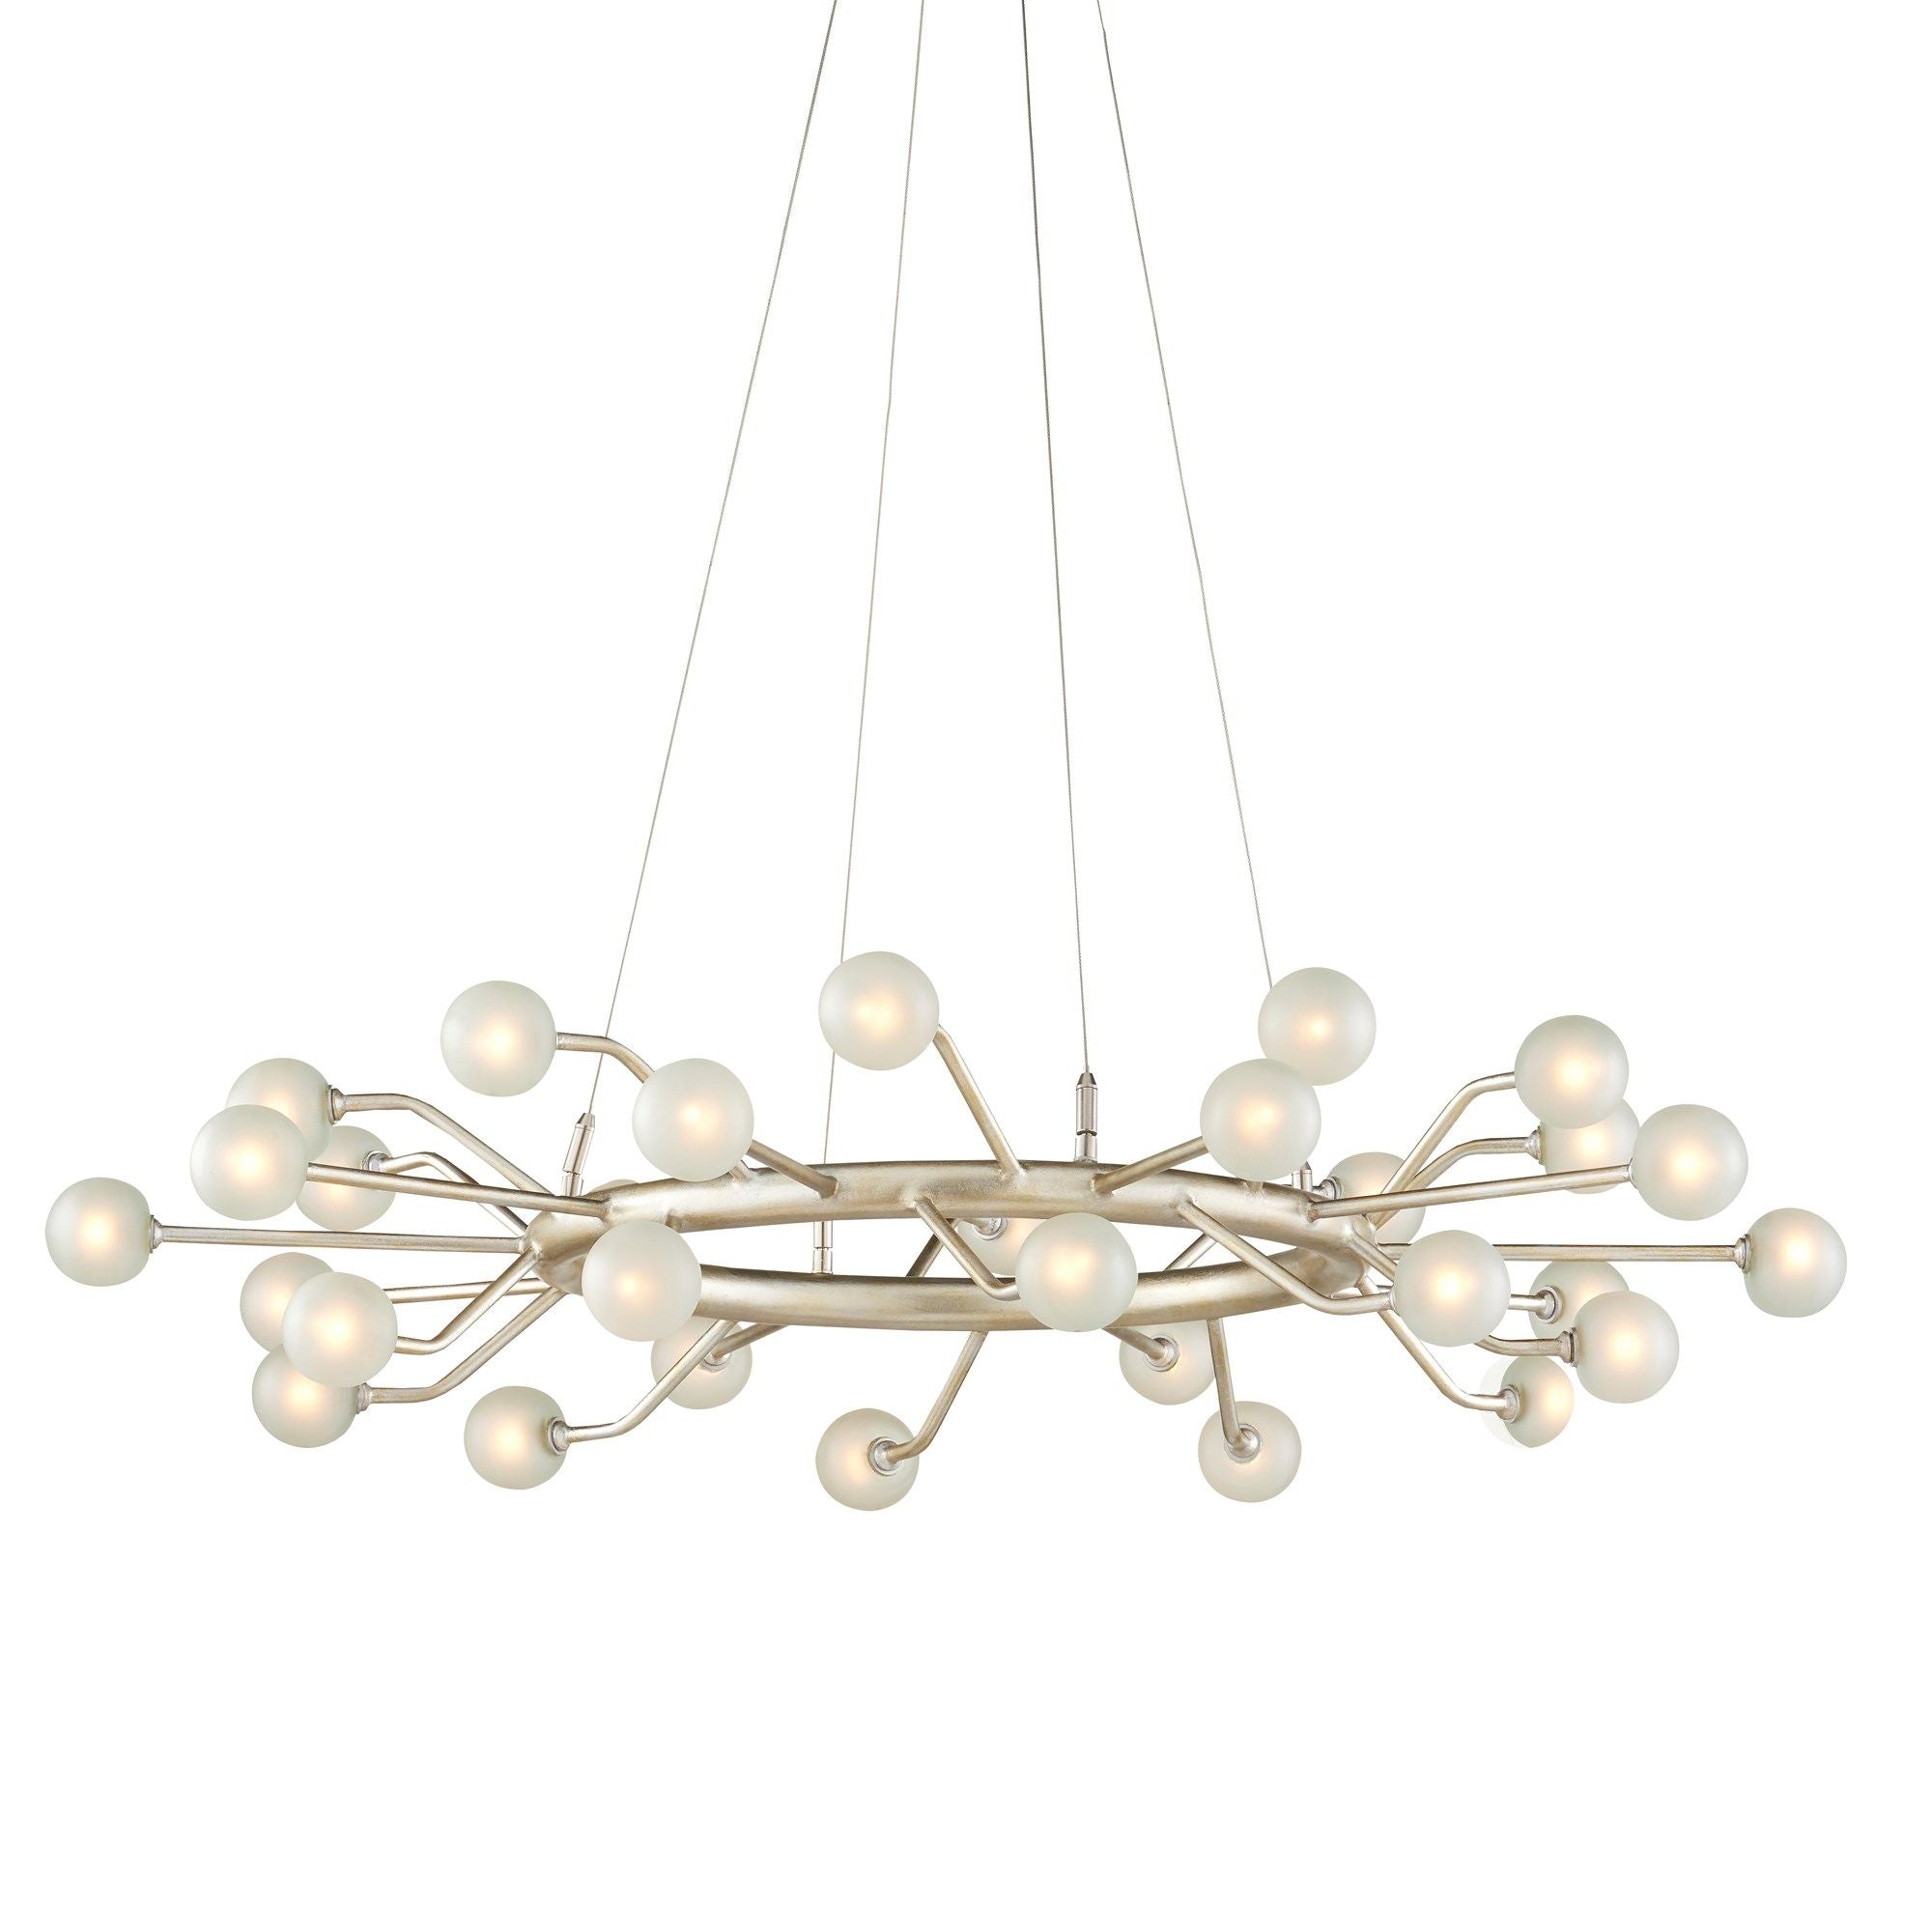 Chaldea Silver Chandelier - Contemporary Silver Leaf/Frosted